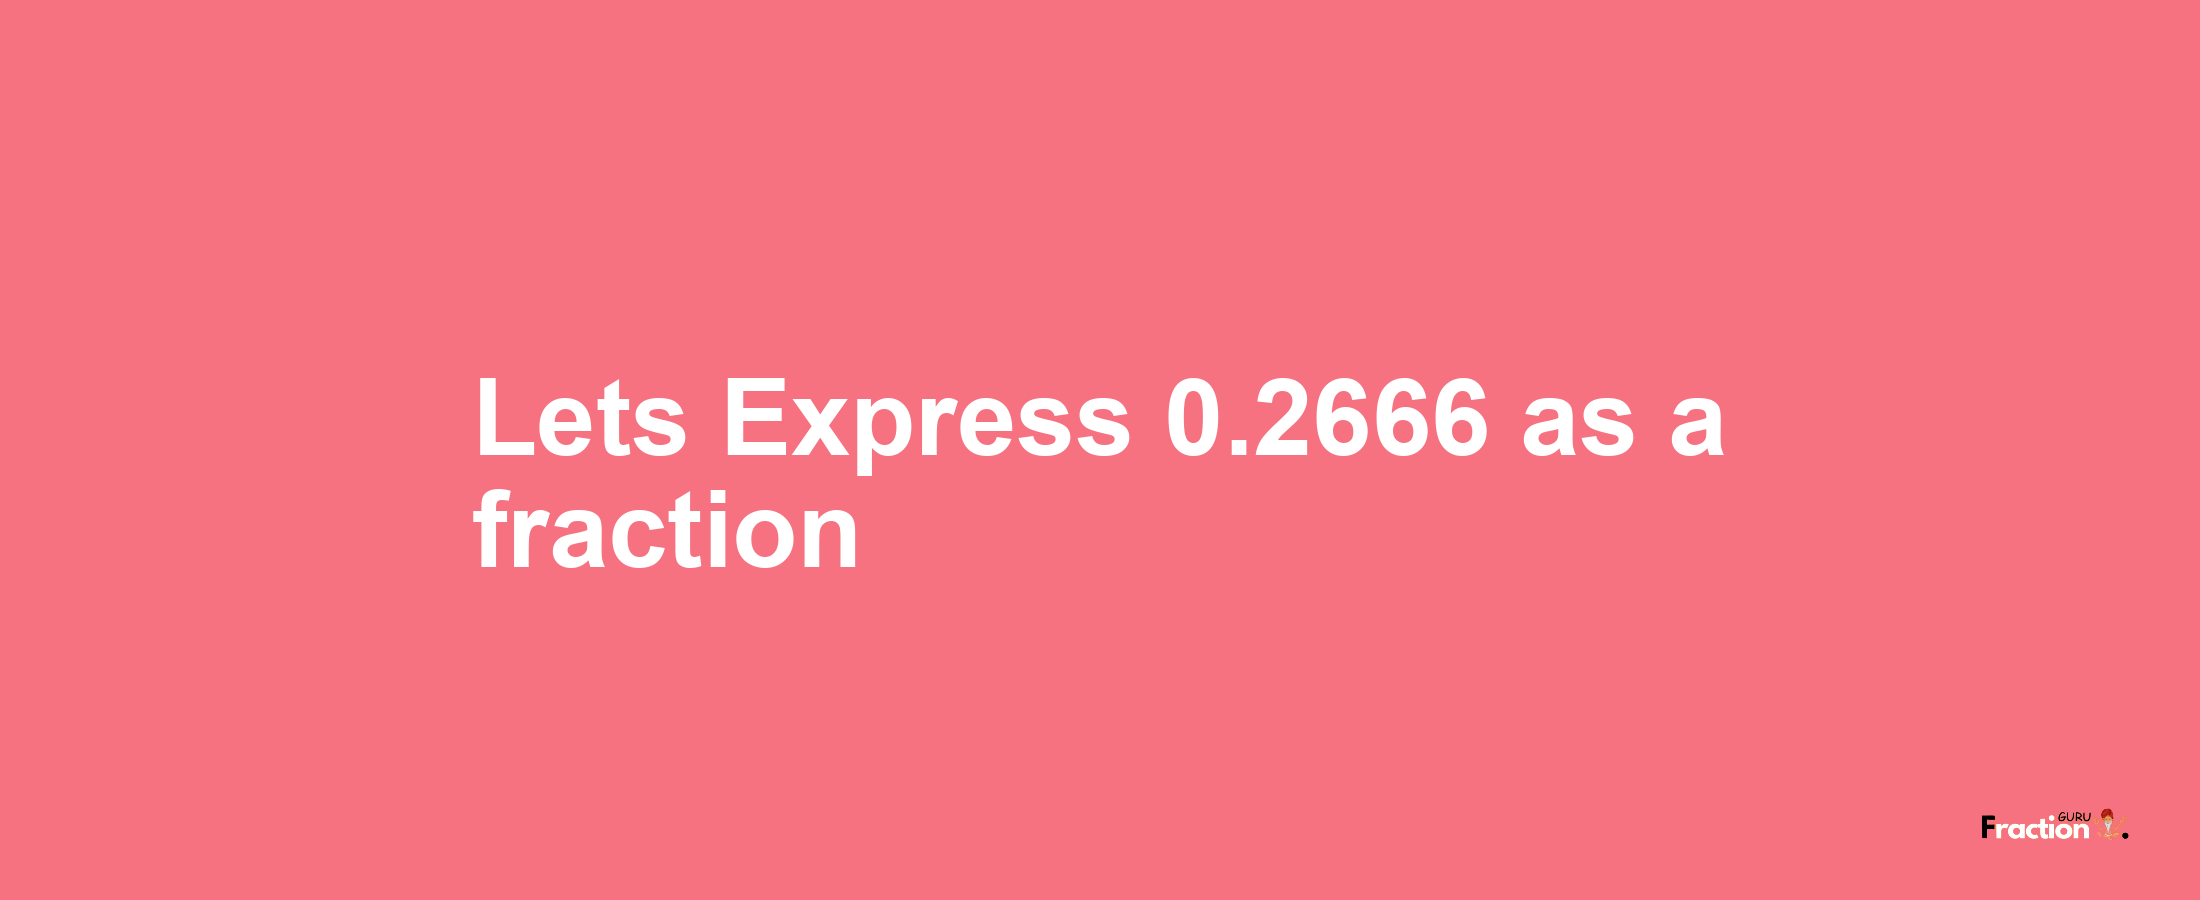 Lets Express 0.2666 as afraction